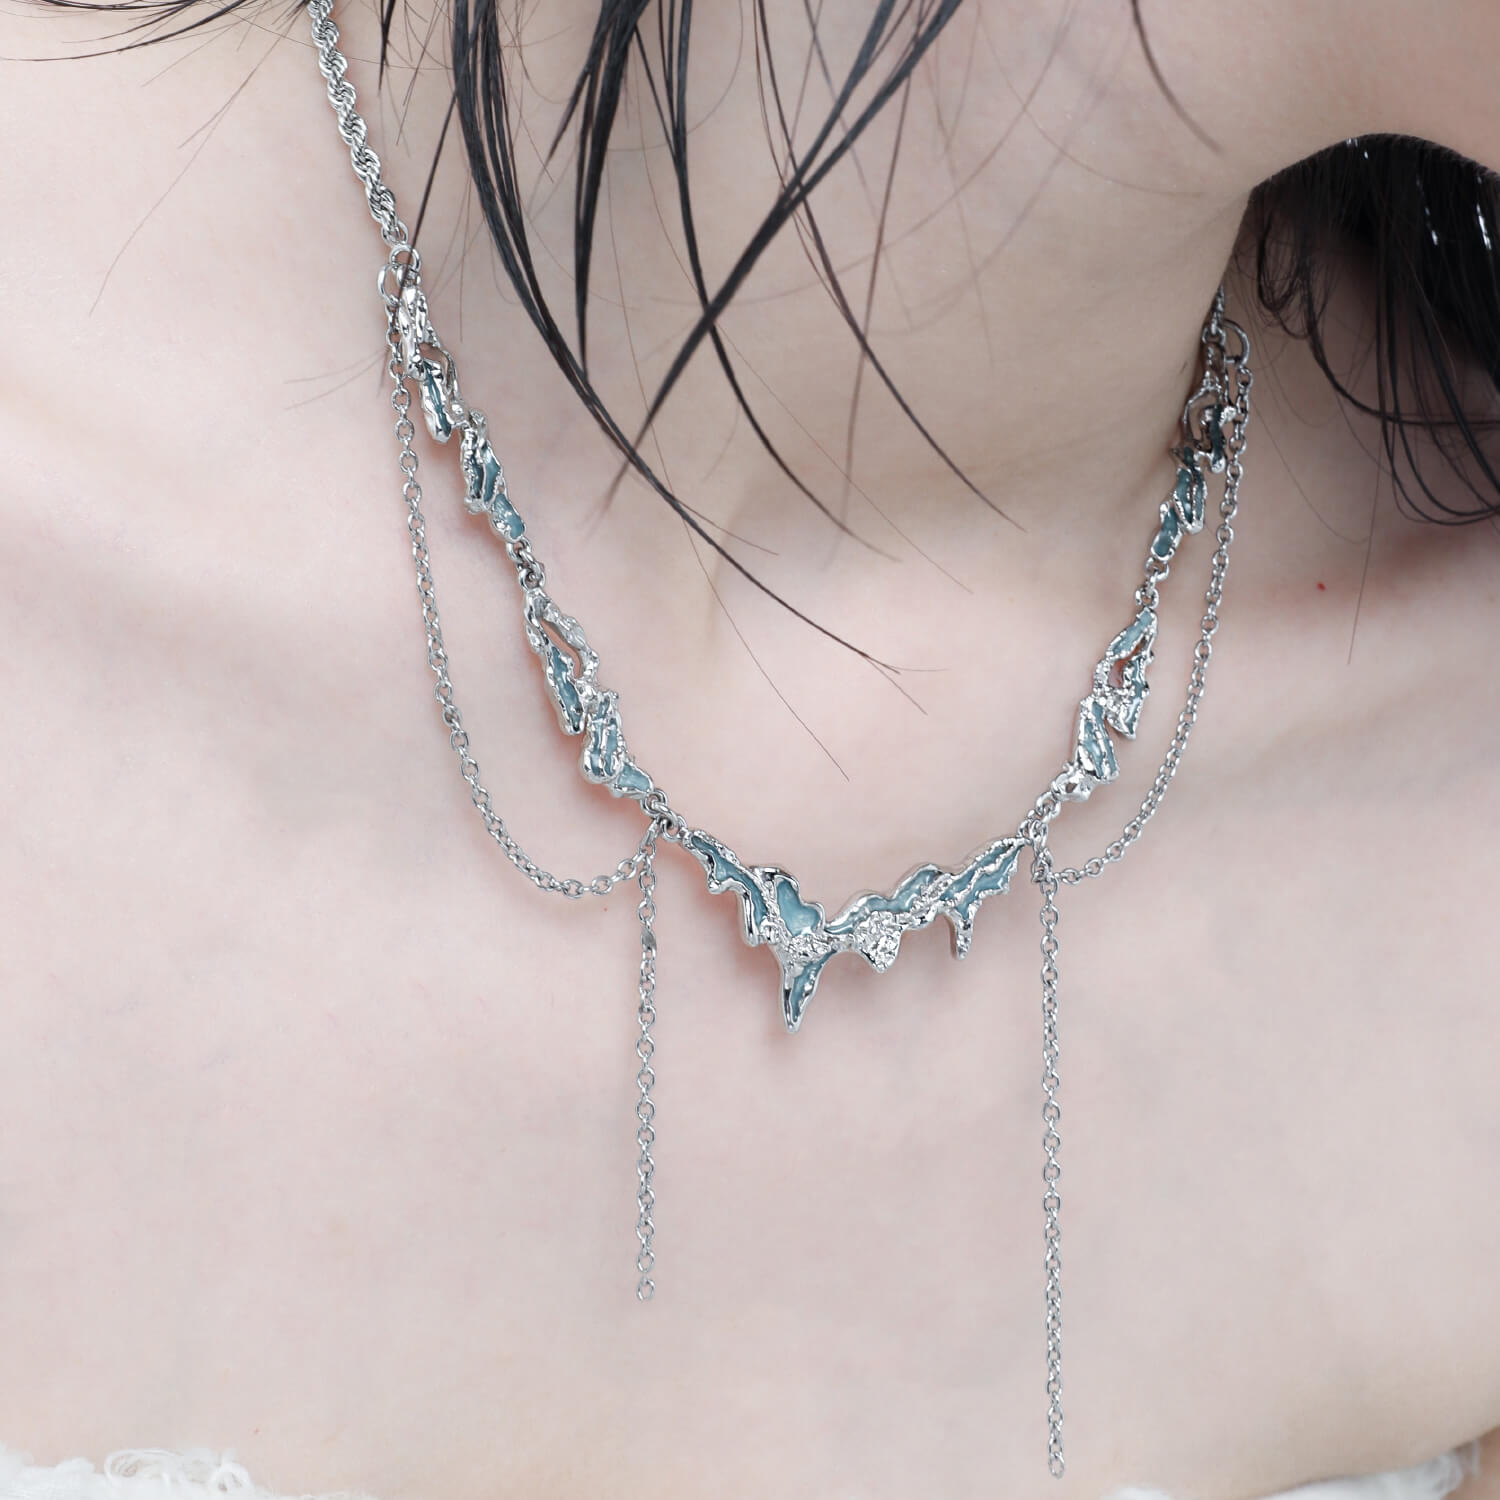 "Little Mermaid" Chain Necklace | Buy at Khanie